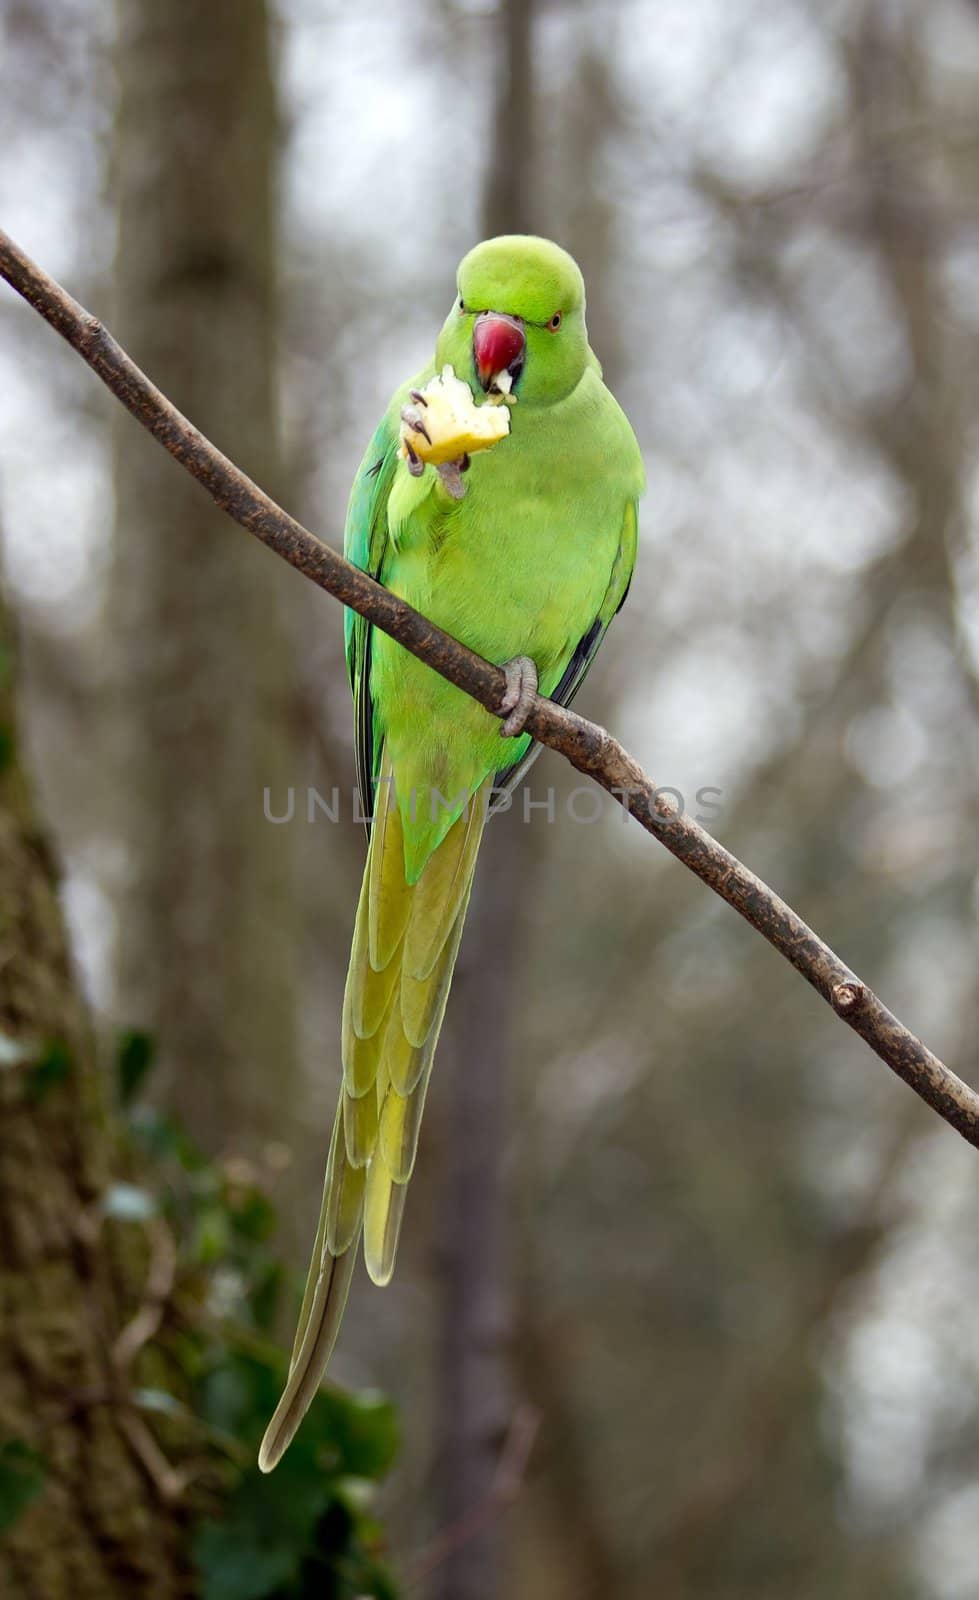 Collared parakeet eating a small end of apple, forest in France by neko92vl